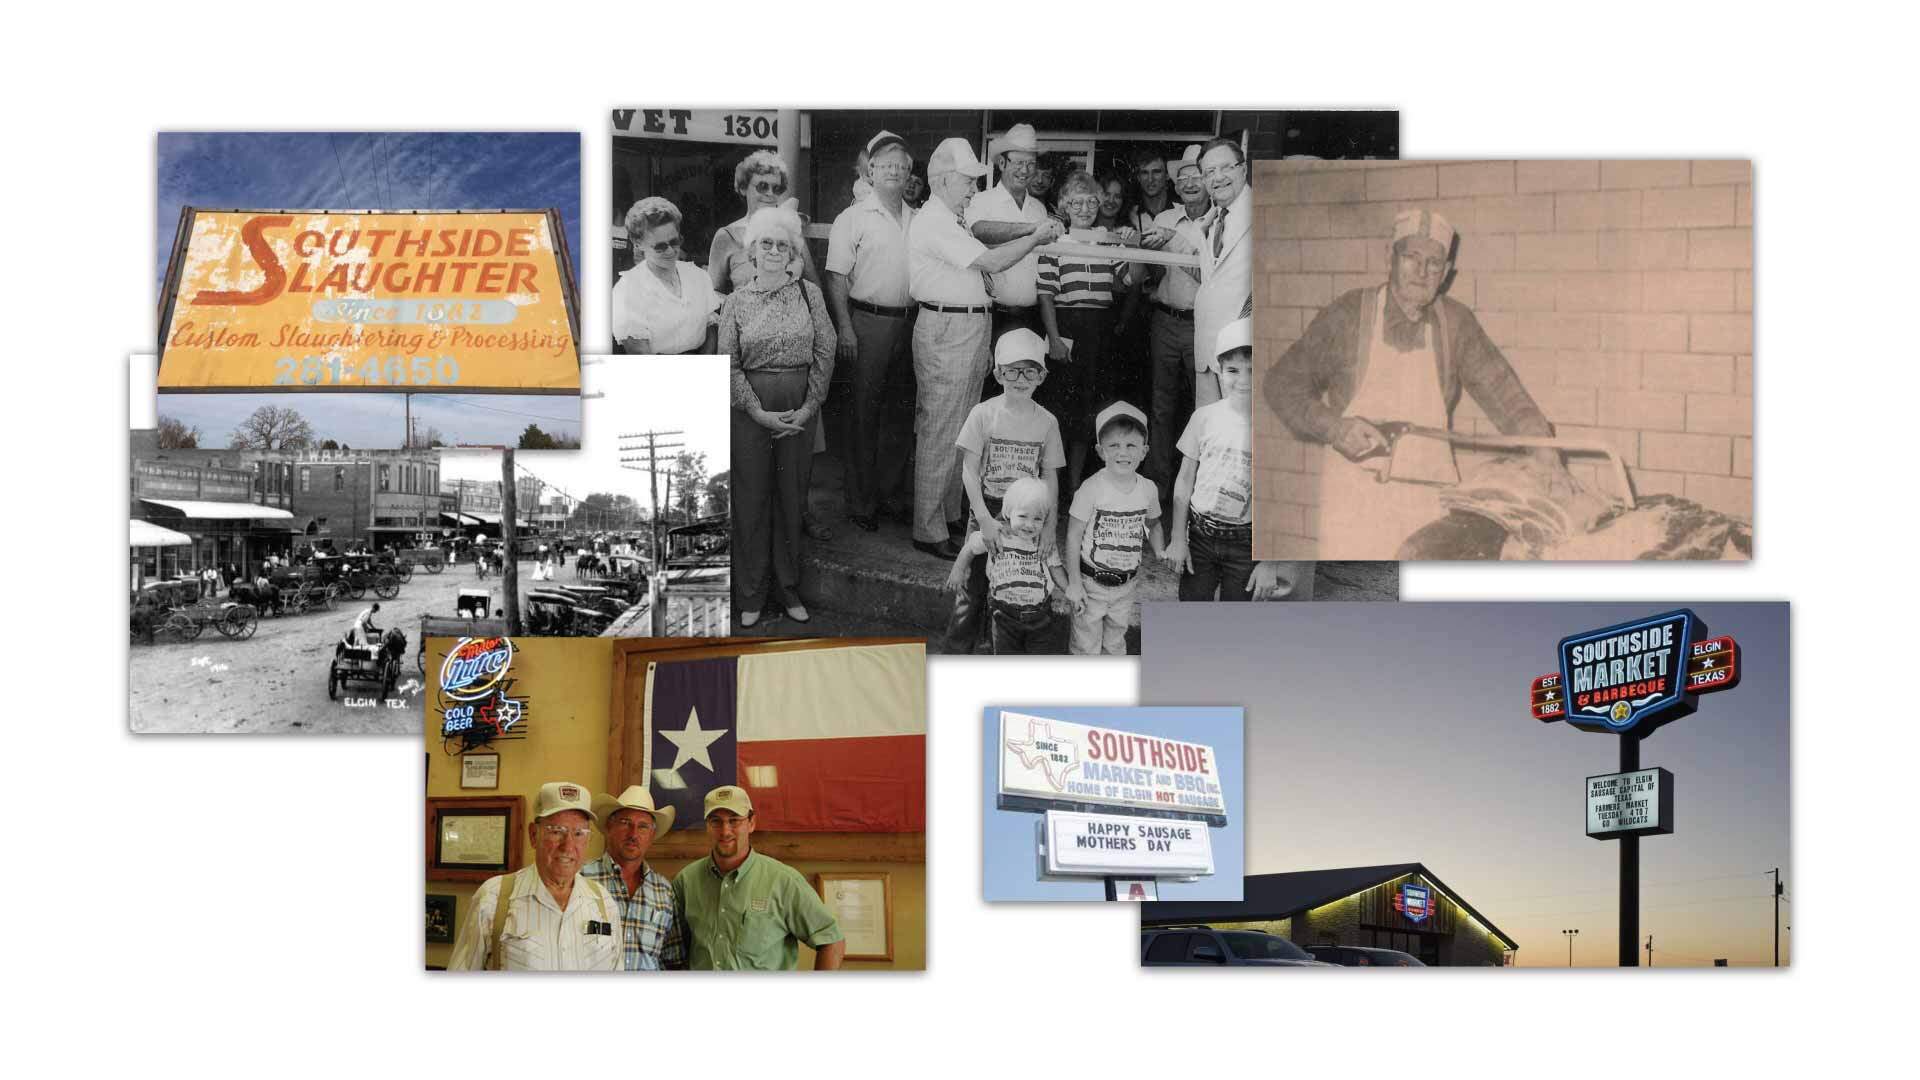 Southside Market & Barbeque brand refresh mood board depicting vintage photographs from Southside's history, including the Bracewell family and Bud Frazier